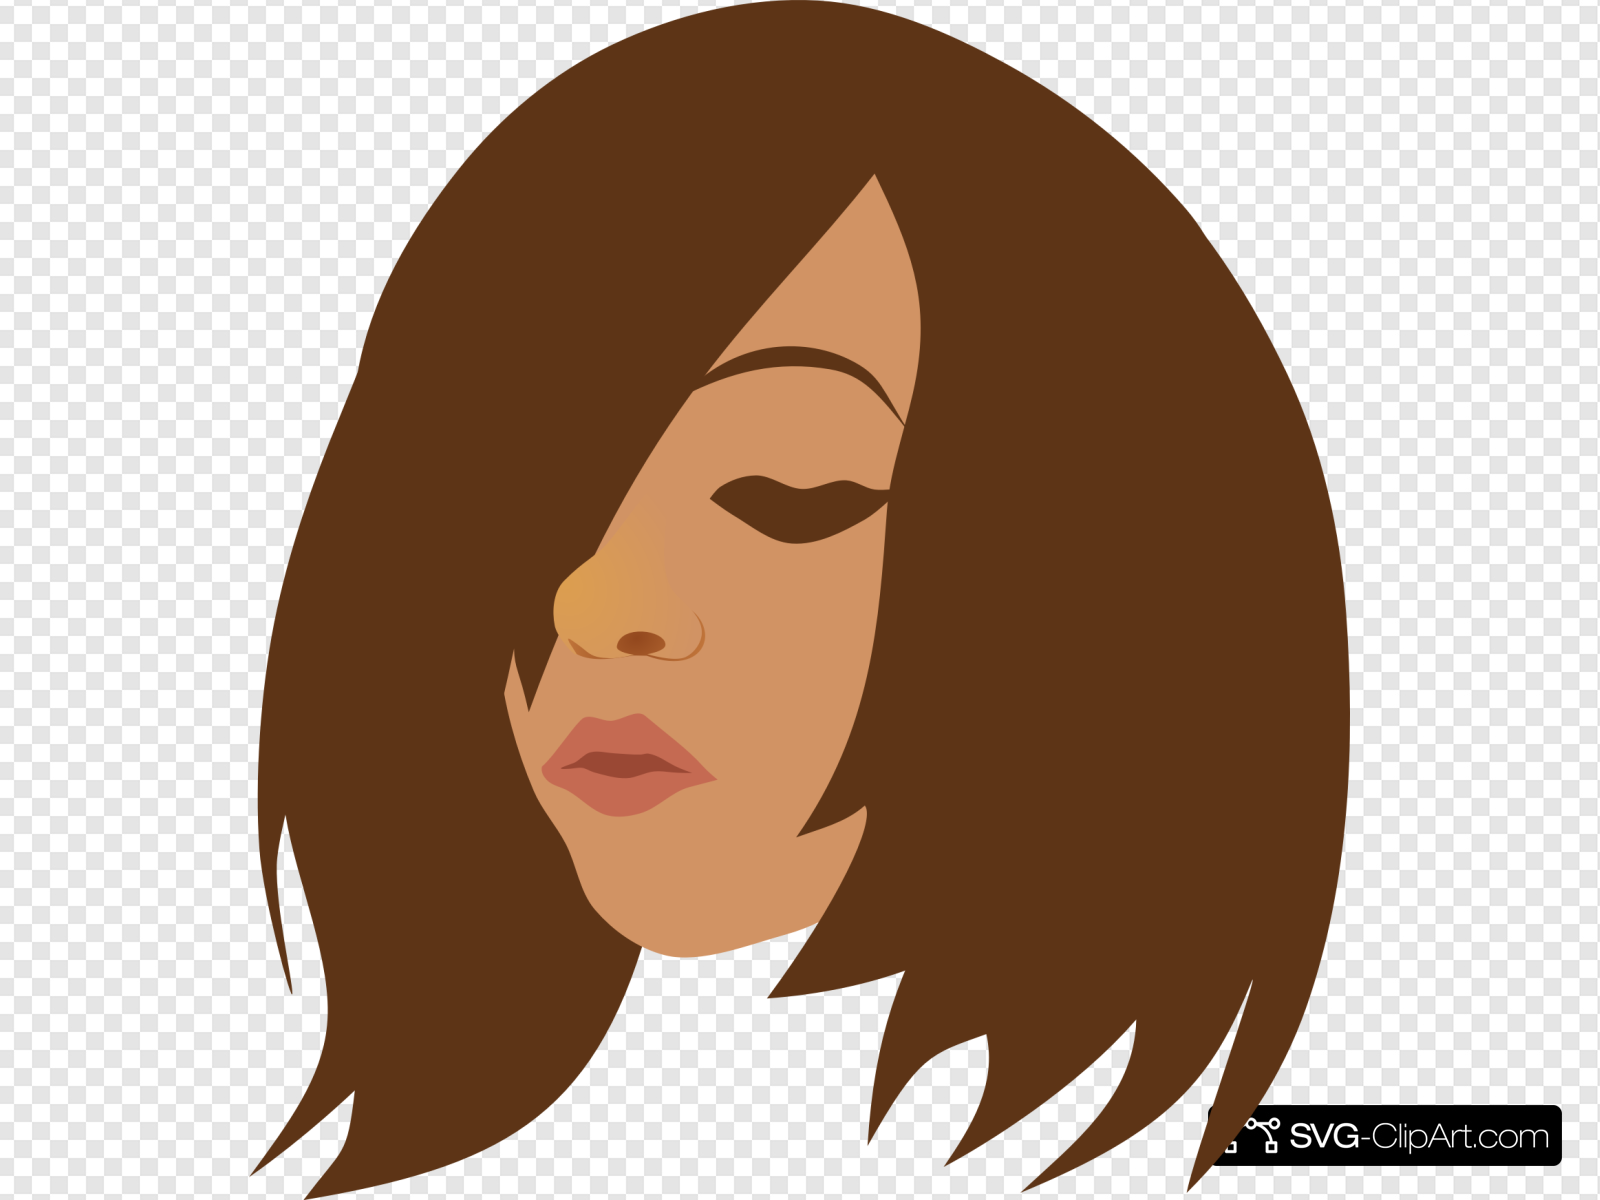 Woman Looking Down Clip art, Icon and SVG.